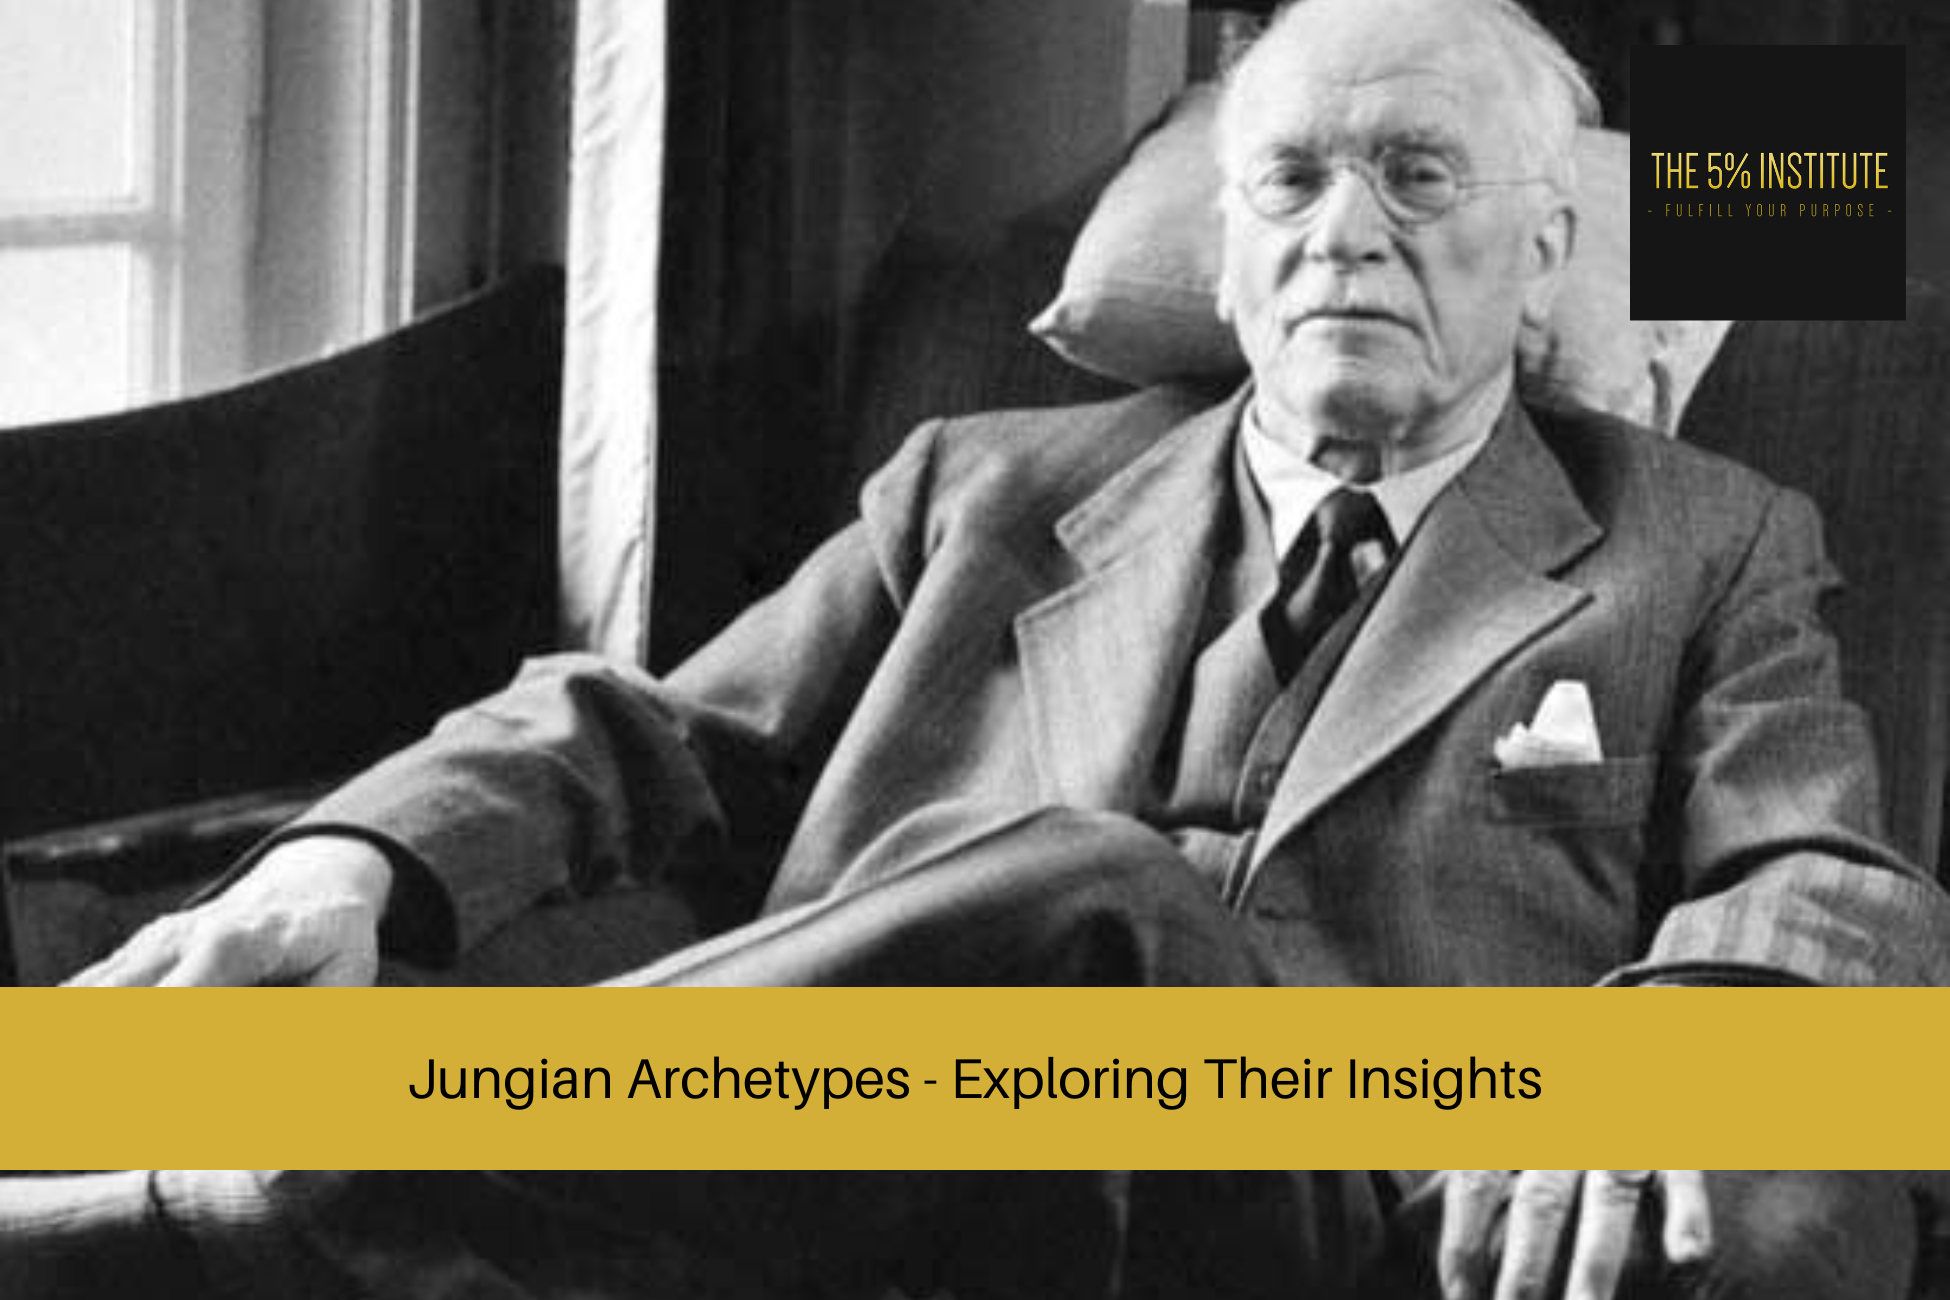 Jungian Archetypes - Exploring Their Insights